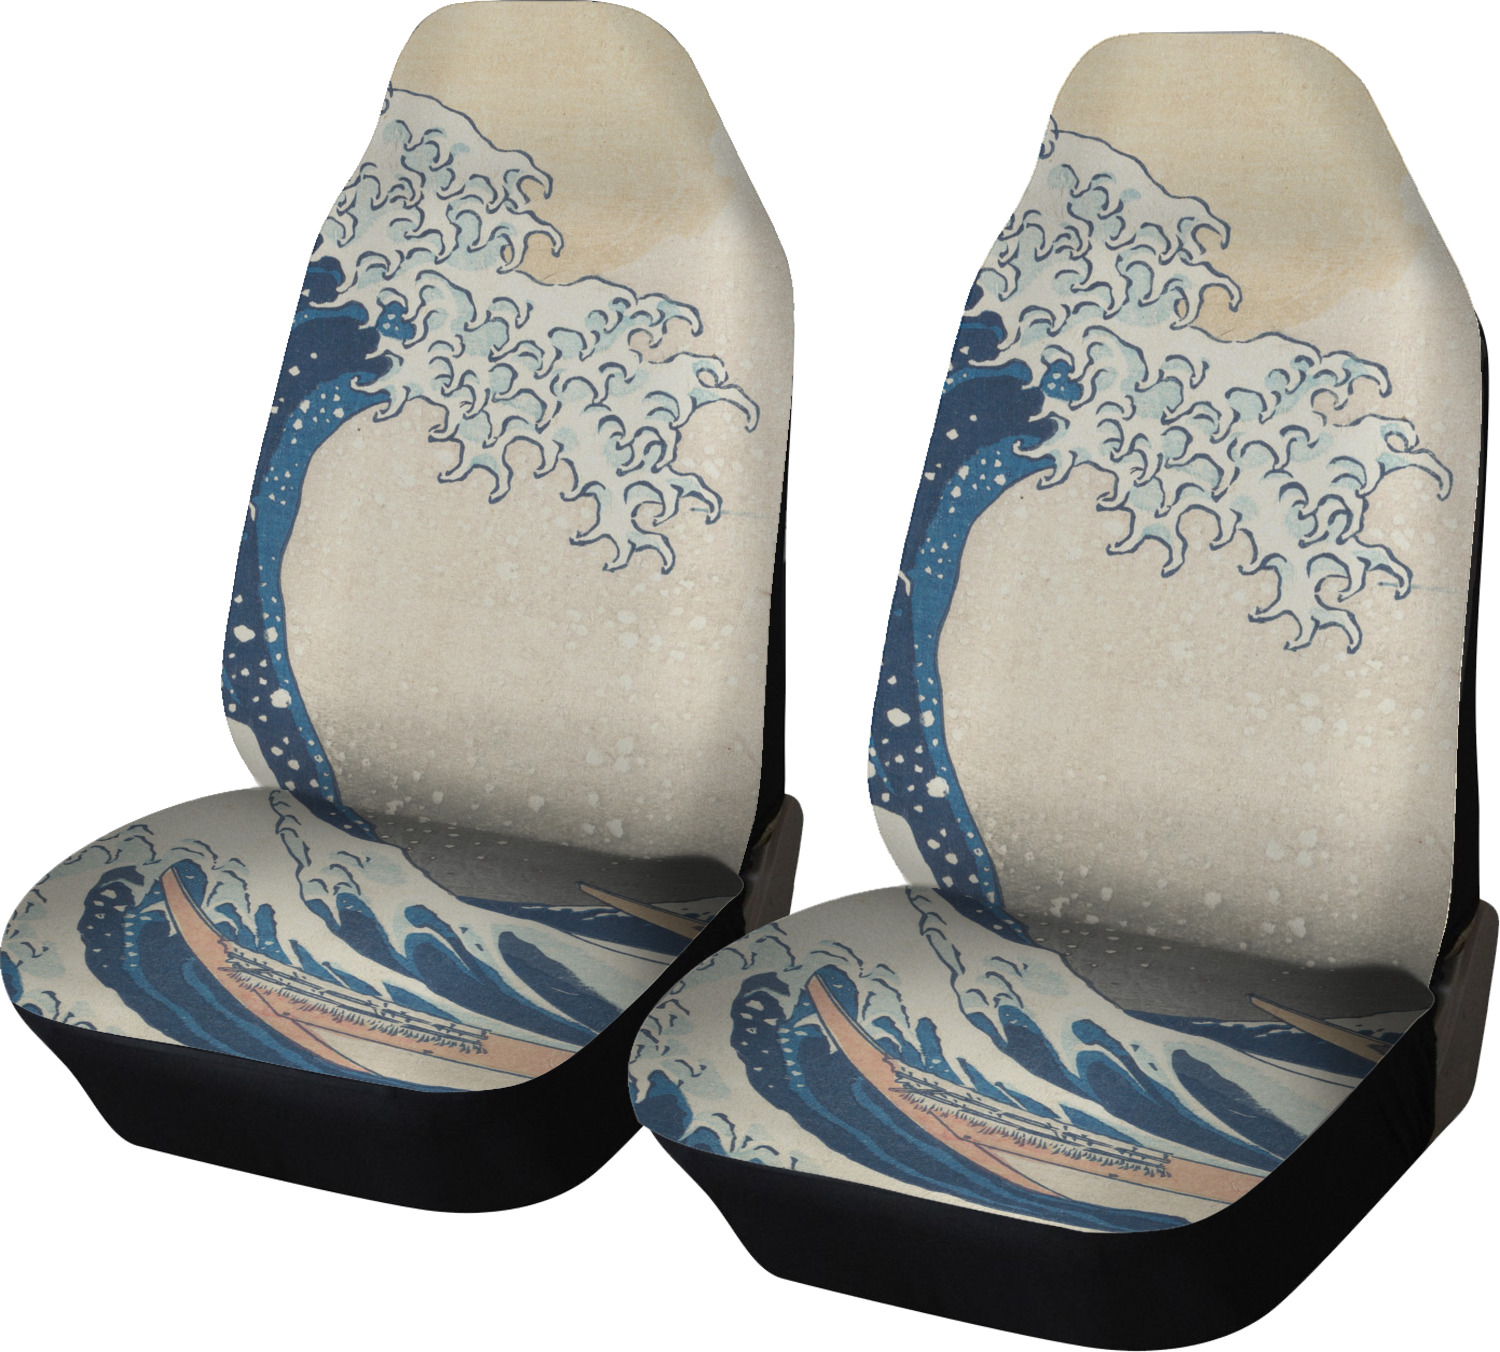 https://www.youcustomizeit.com/common/MAKE/1020030/Great-Wave-of-Kanagawa-Car-Seat-Covers.jpg?lm=1670738456